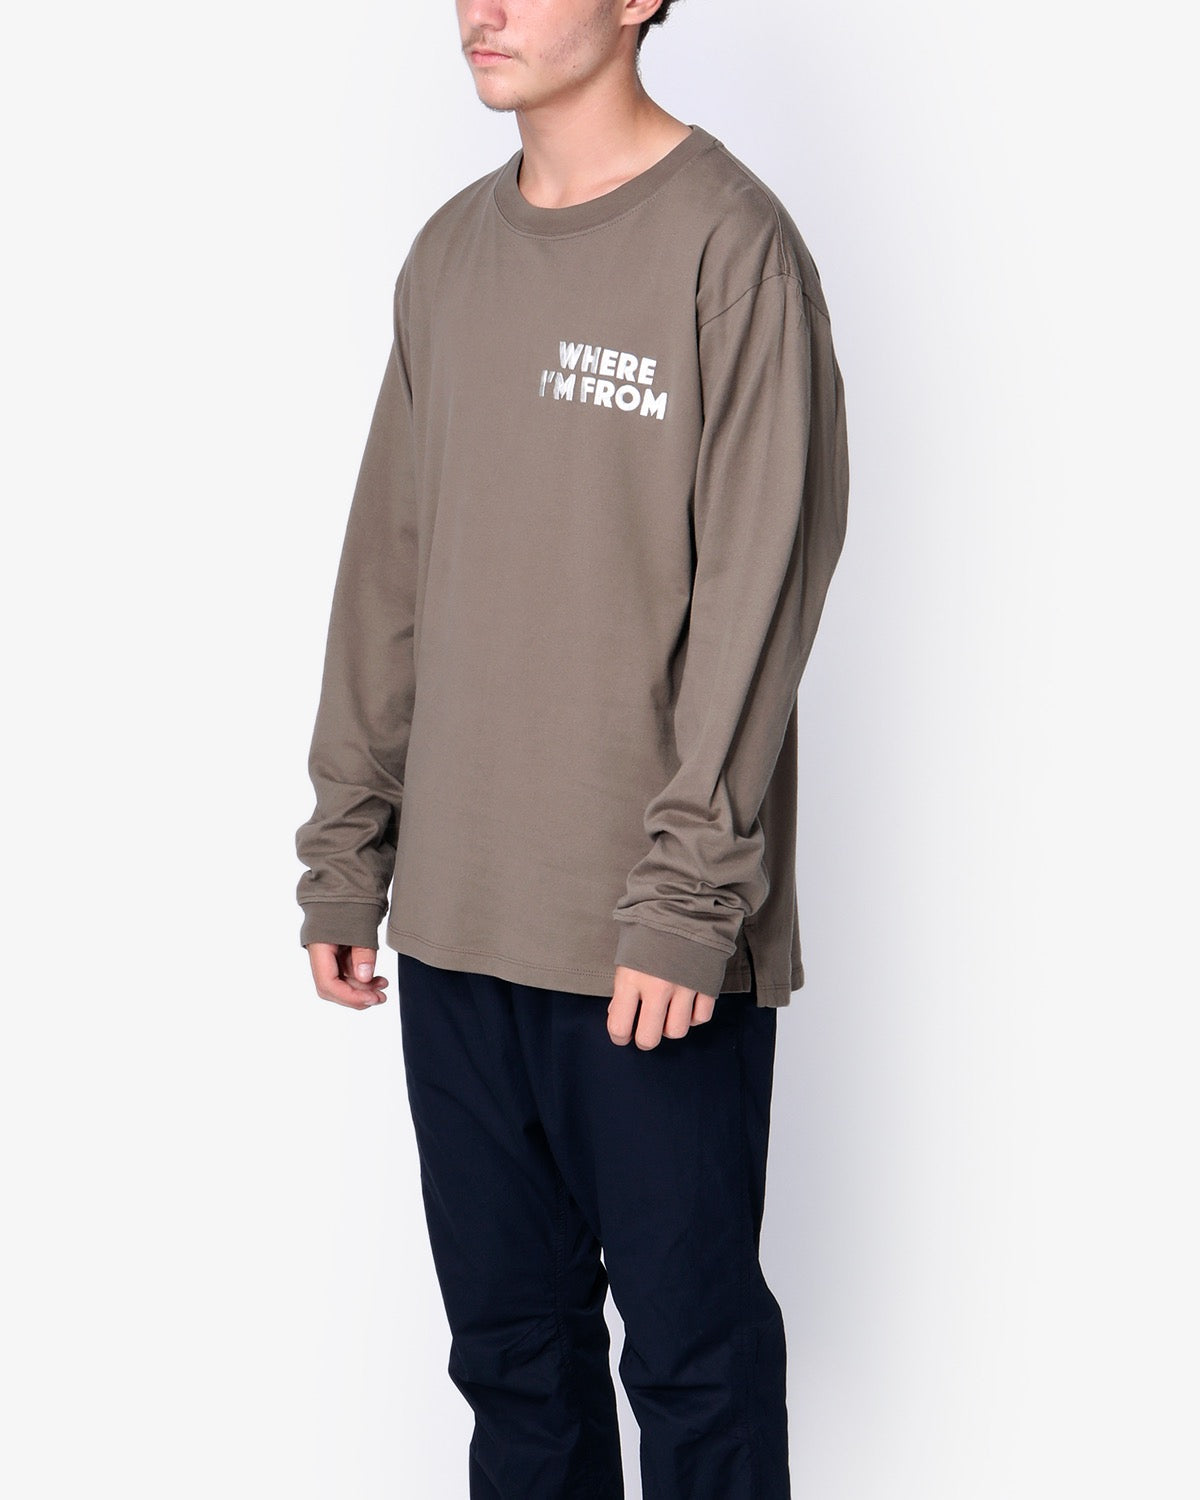 DWELLER L/S TEE "WHERE I'M FROM"